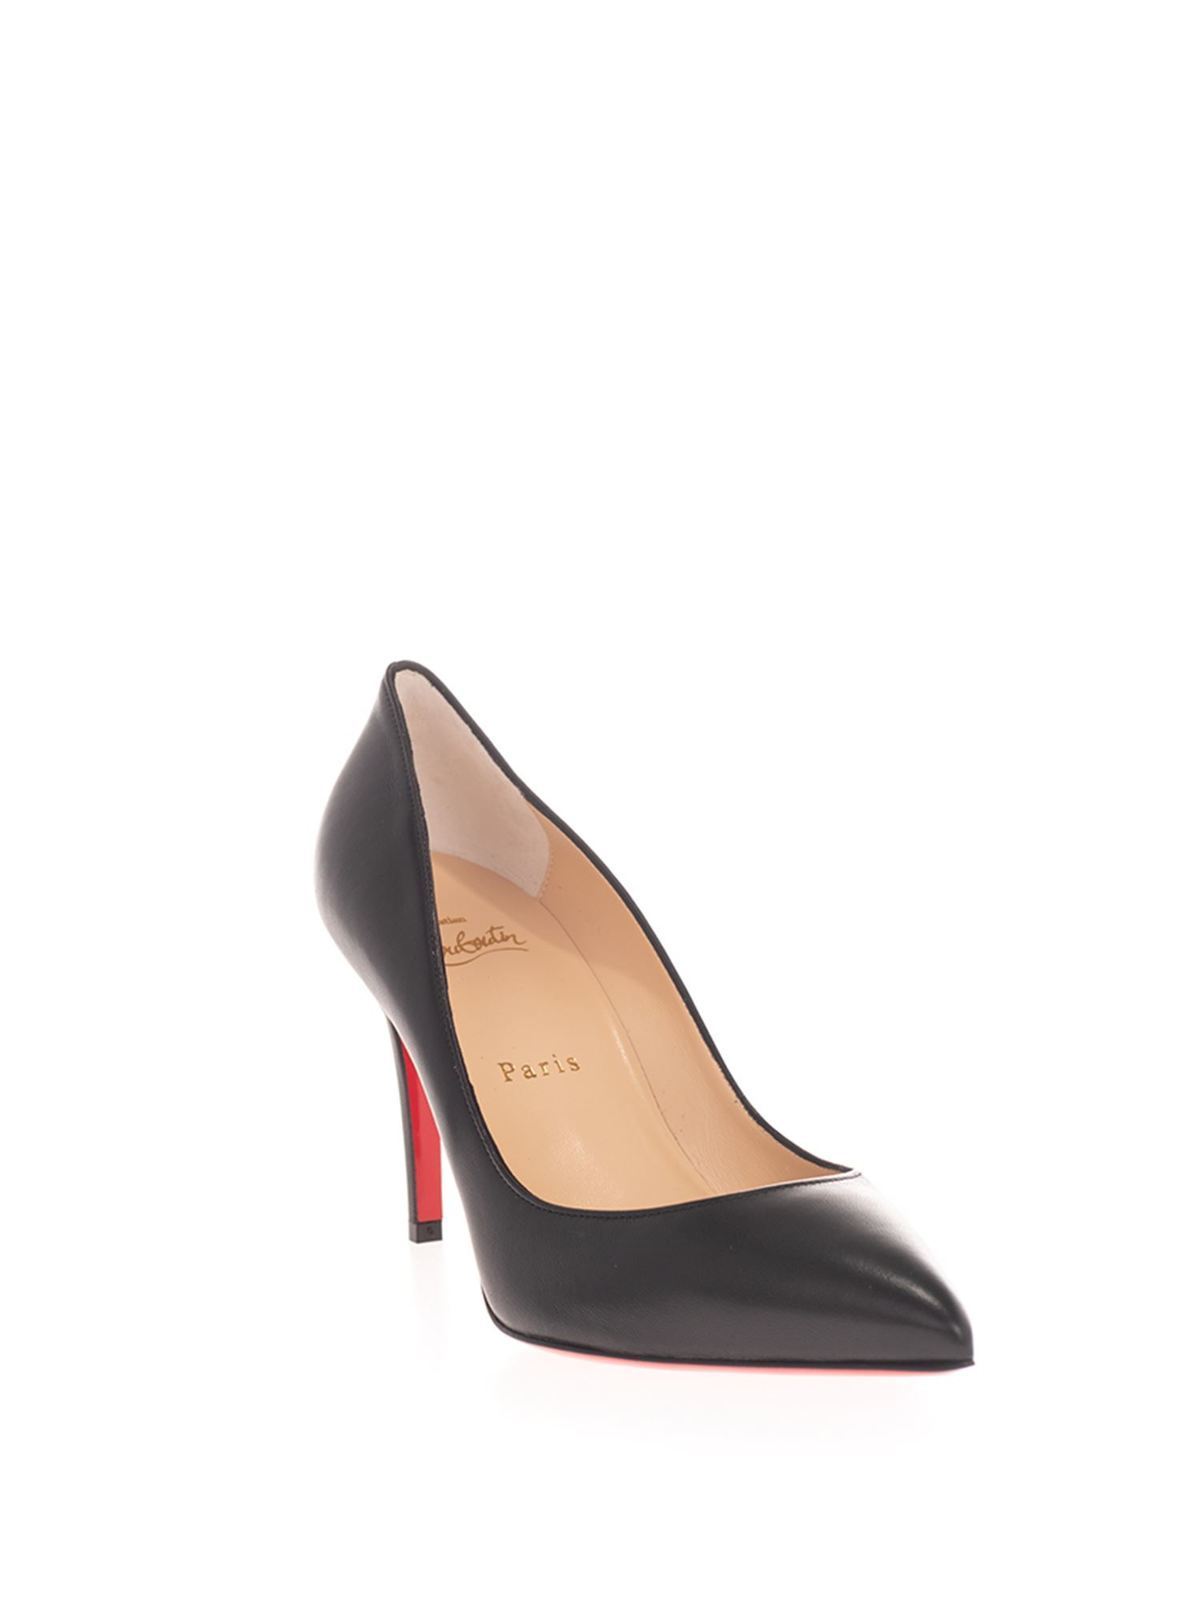 Christian Louboutin - Pigalle 85 Patent-leather Pumps - Black